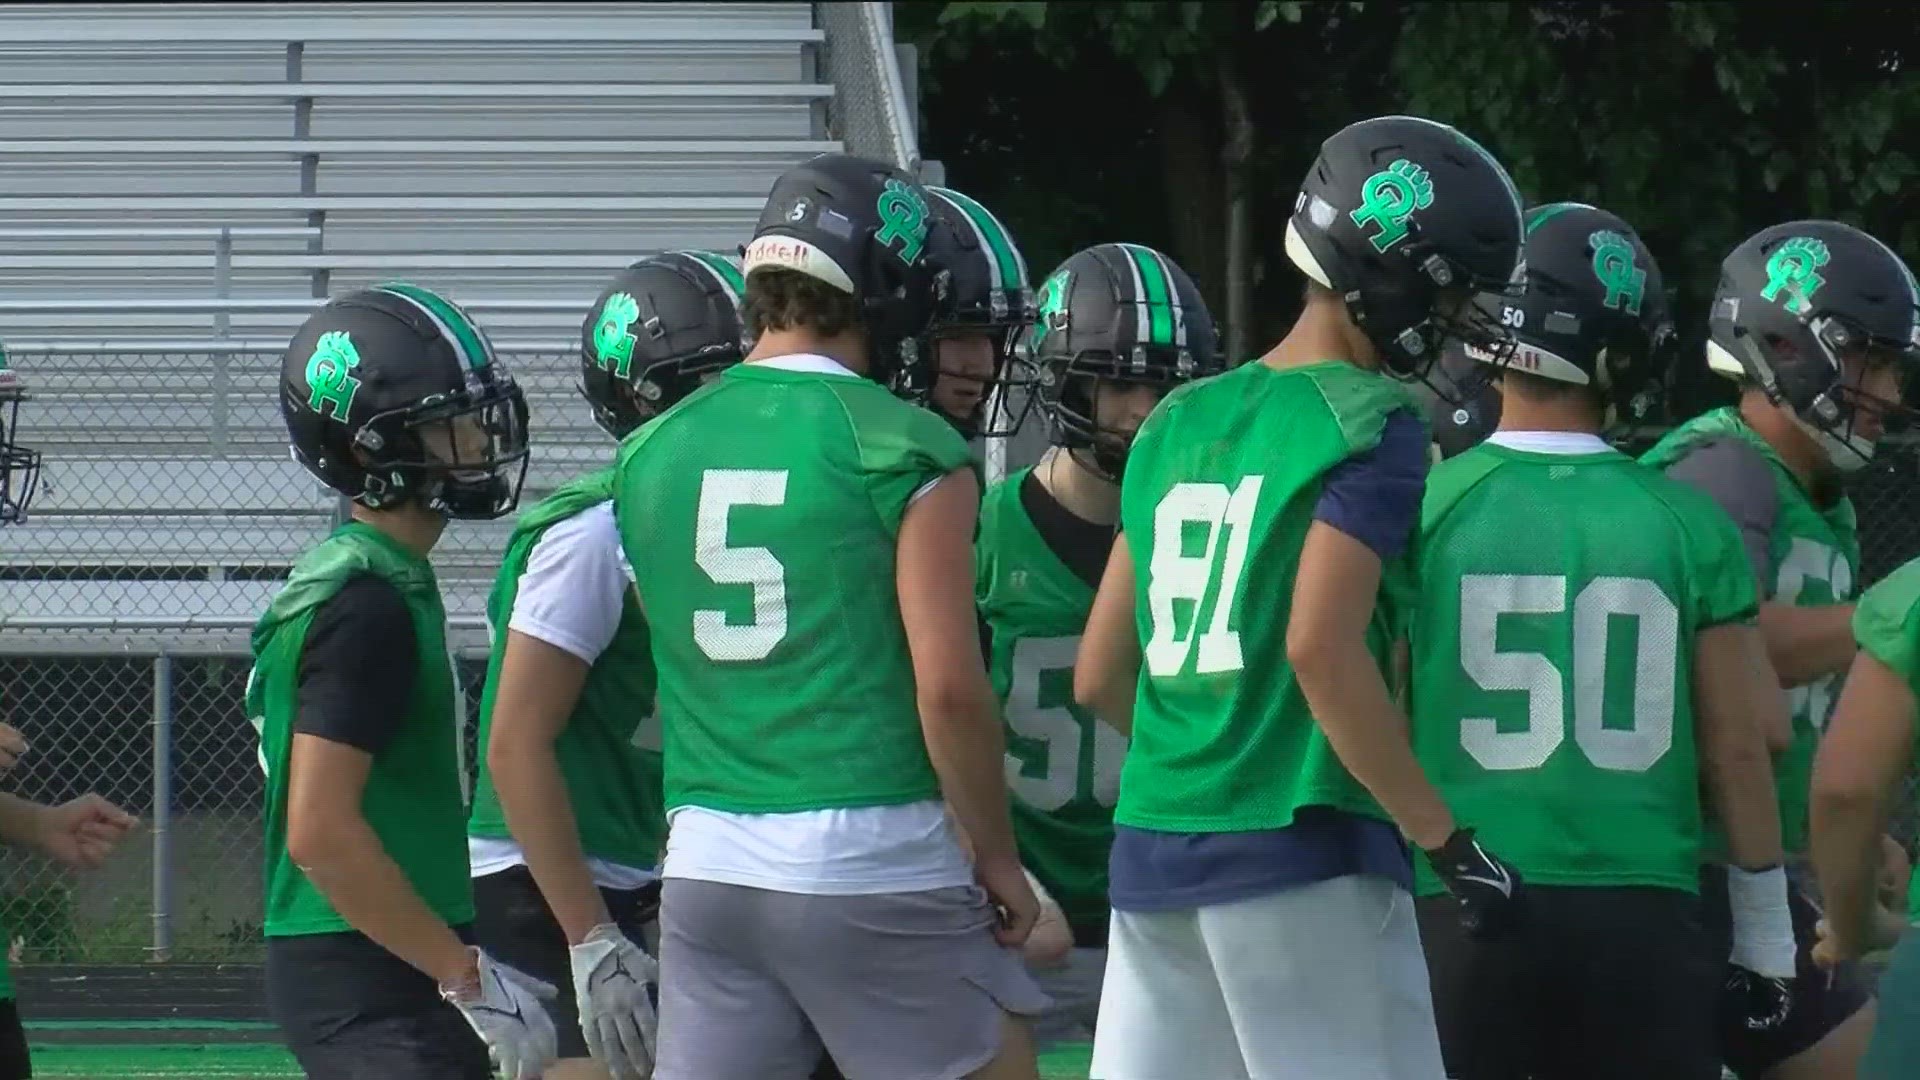 Brandon Carter will make his Ottawa Hills coaching debut at home on Friday when the Green Bears take on Gibsonburg.